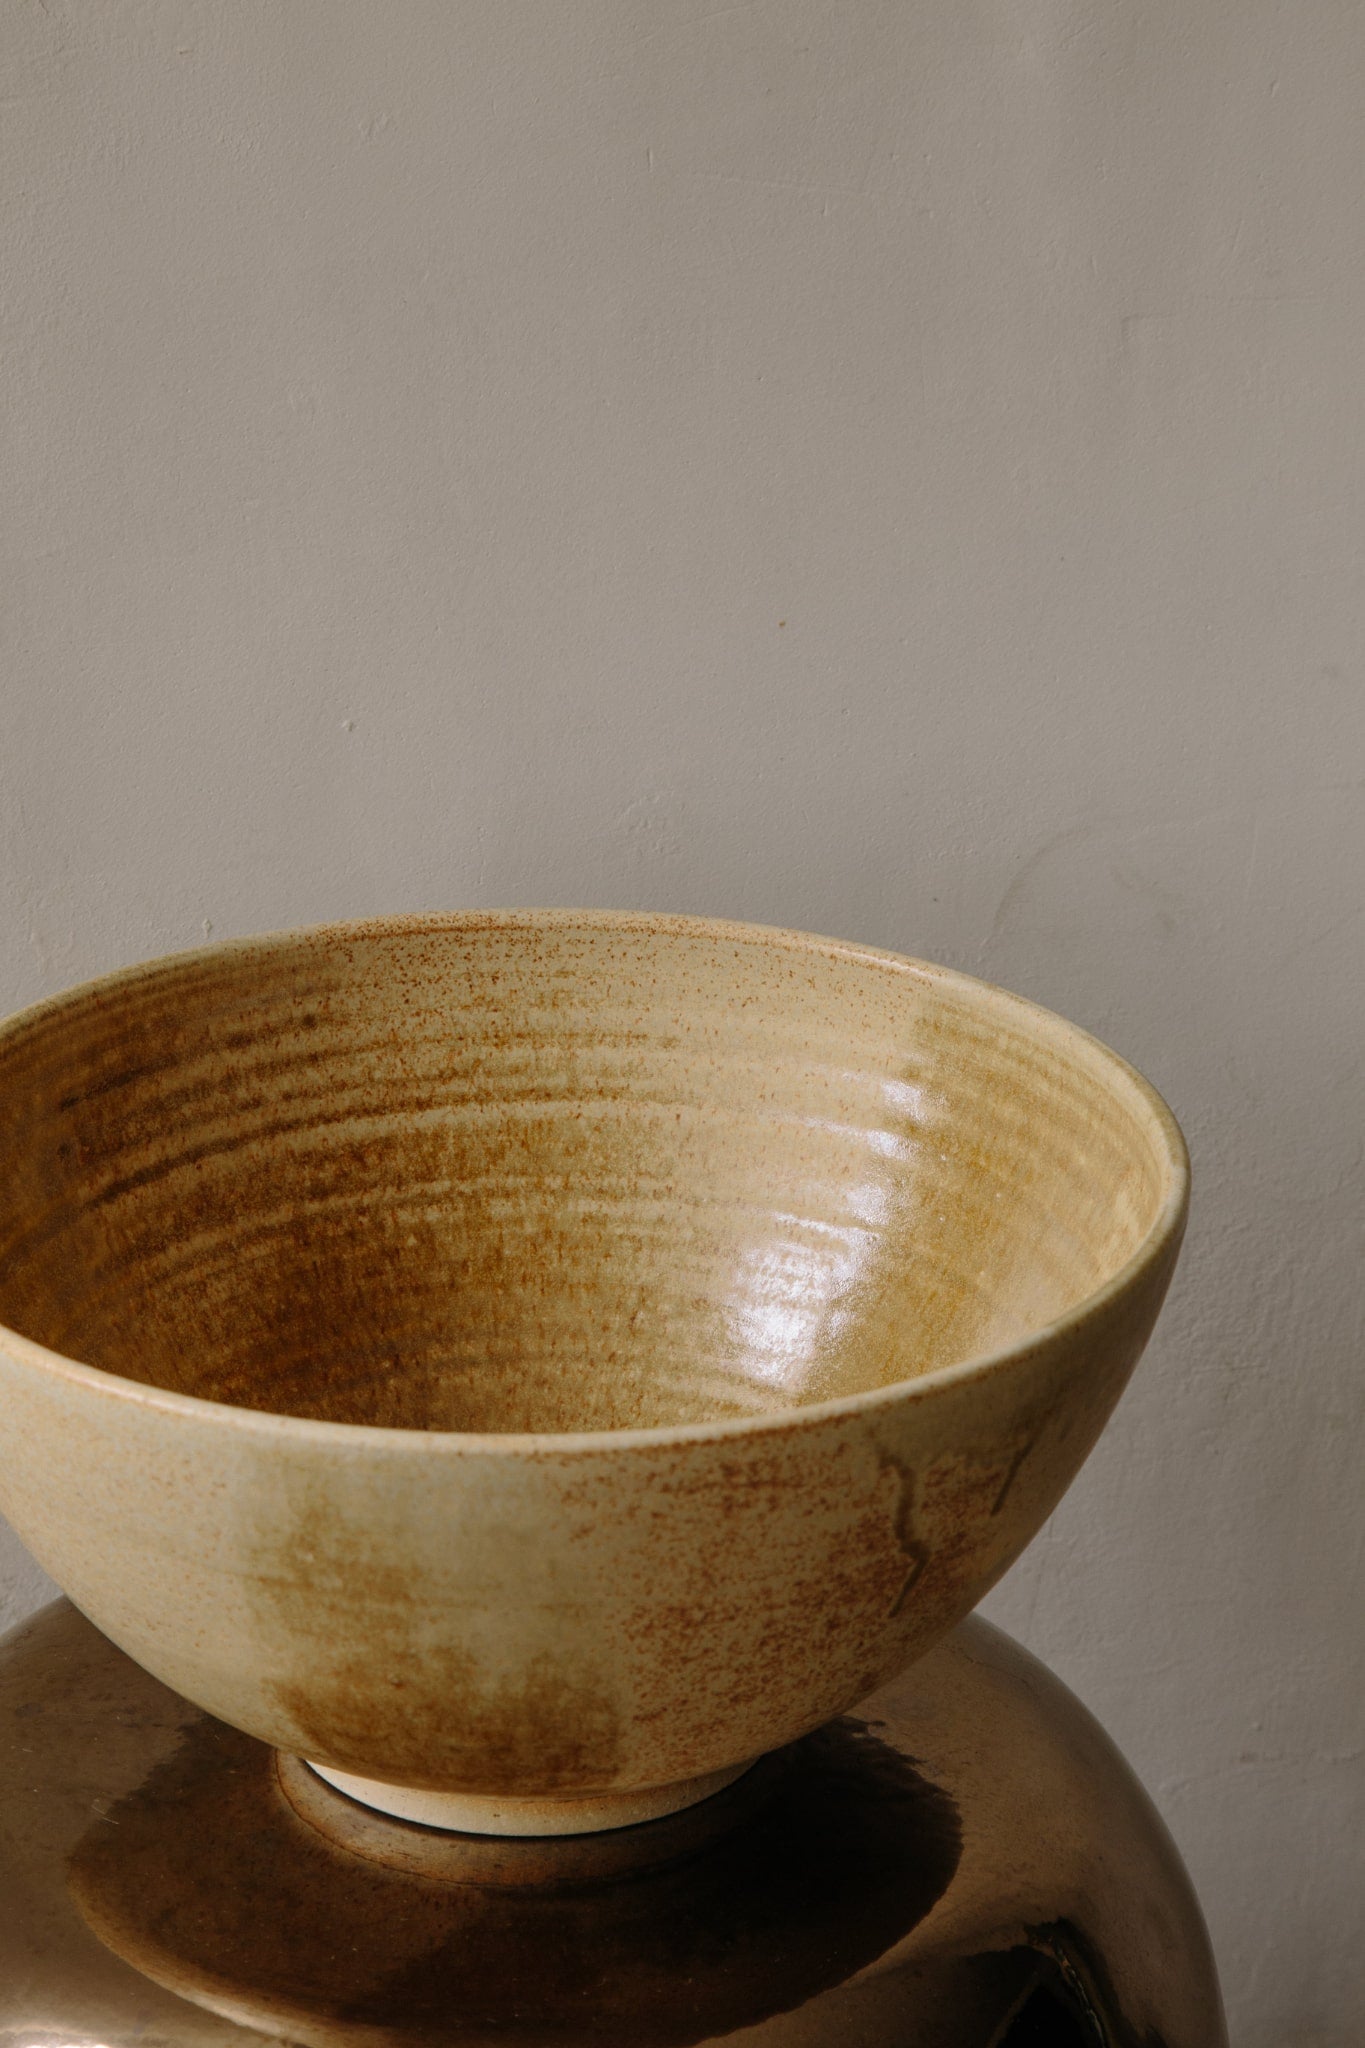 ALT=Large ochre yellow ceramic bowl placed on a metallic copper stool photographed in natural light coming in from the left.